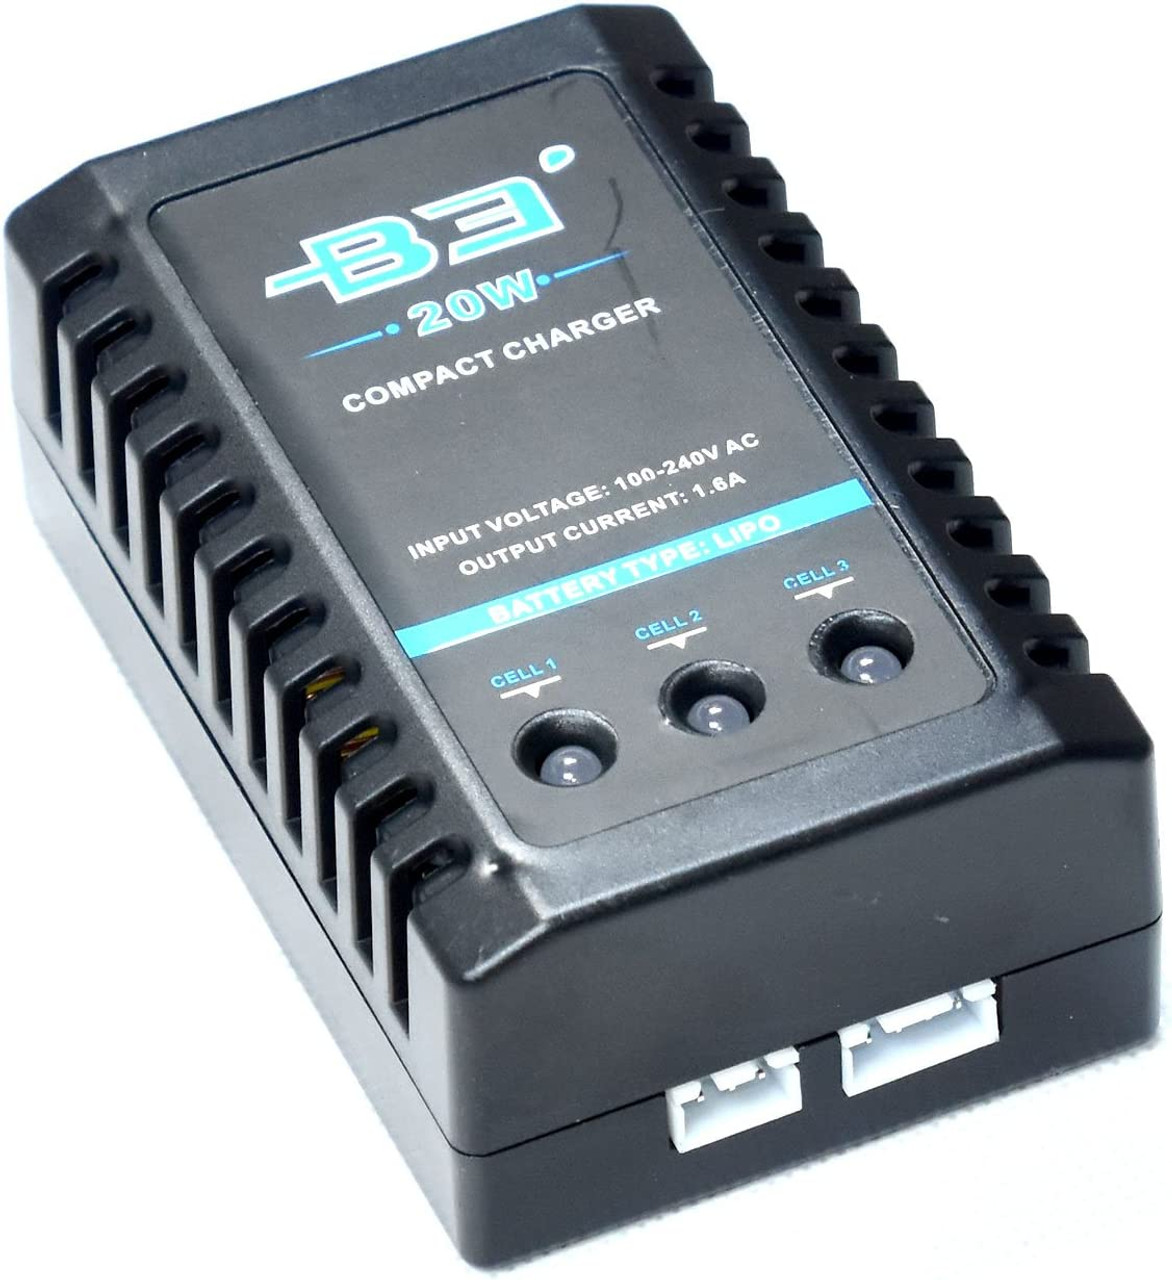 Instruere Tanke kande B3 20W Compact Charger - Flite Test Retail Store